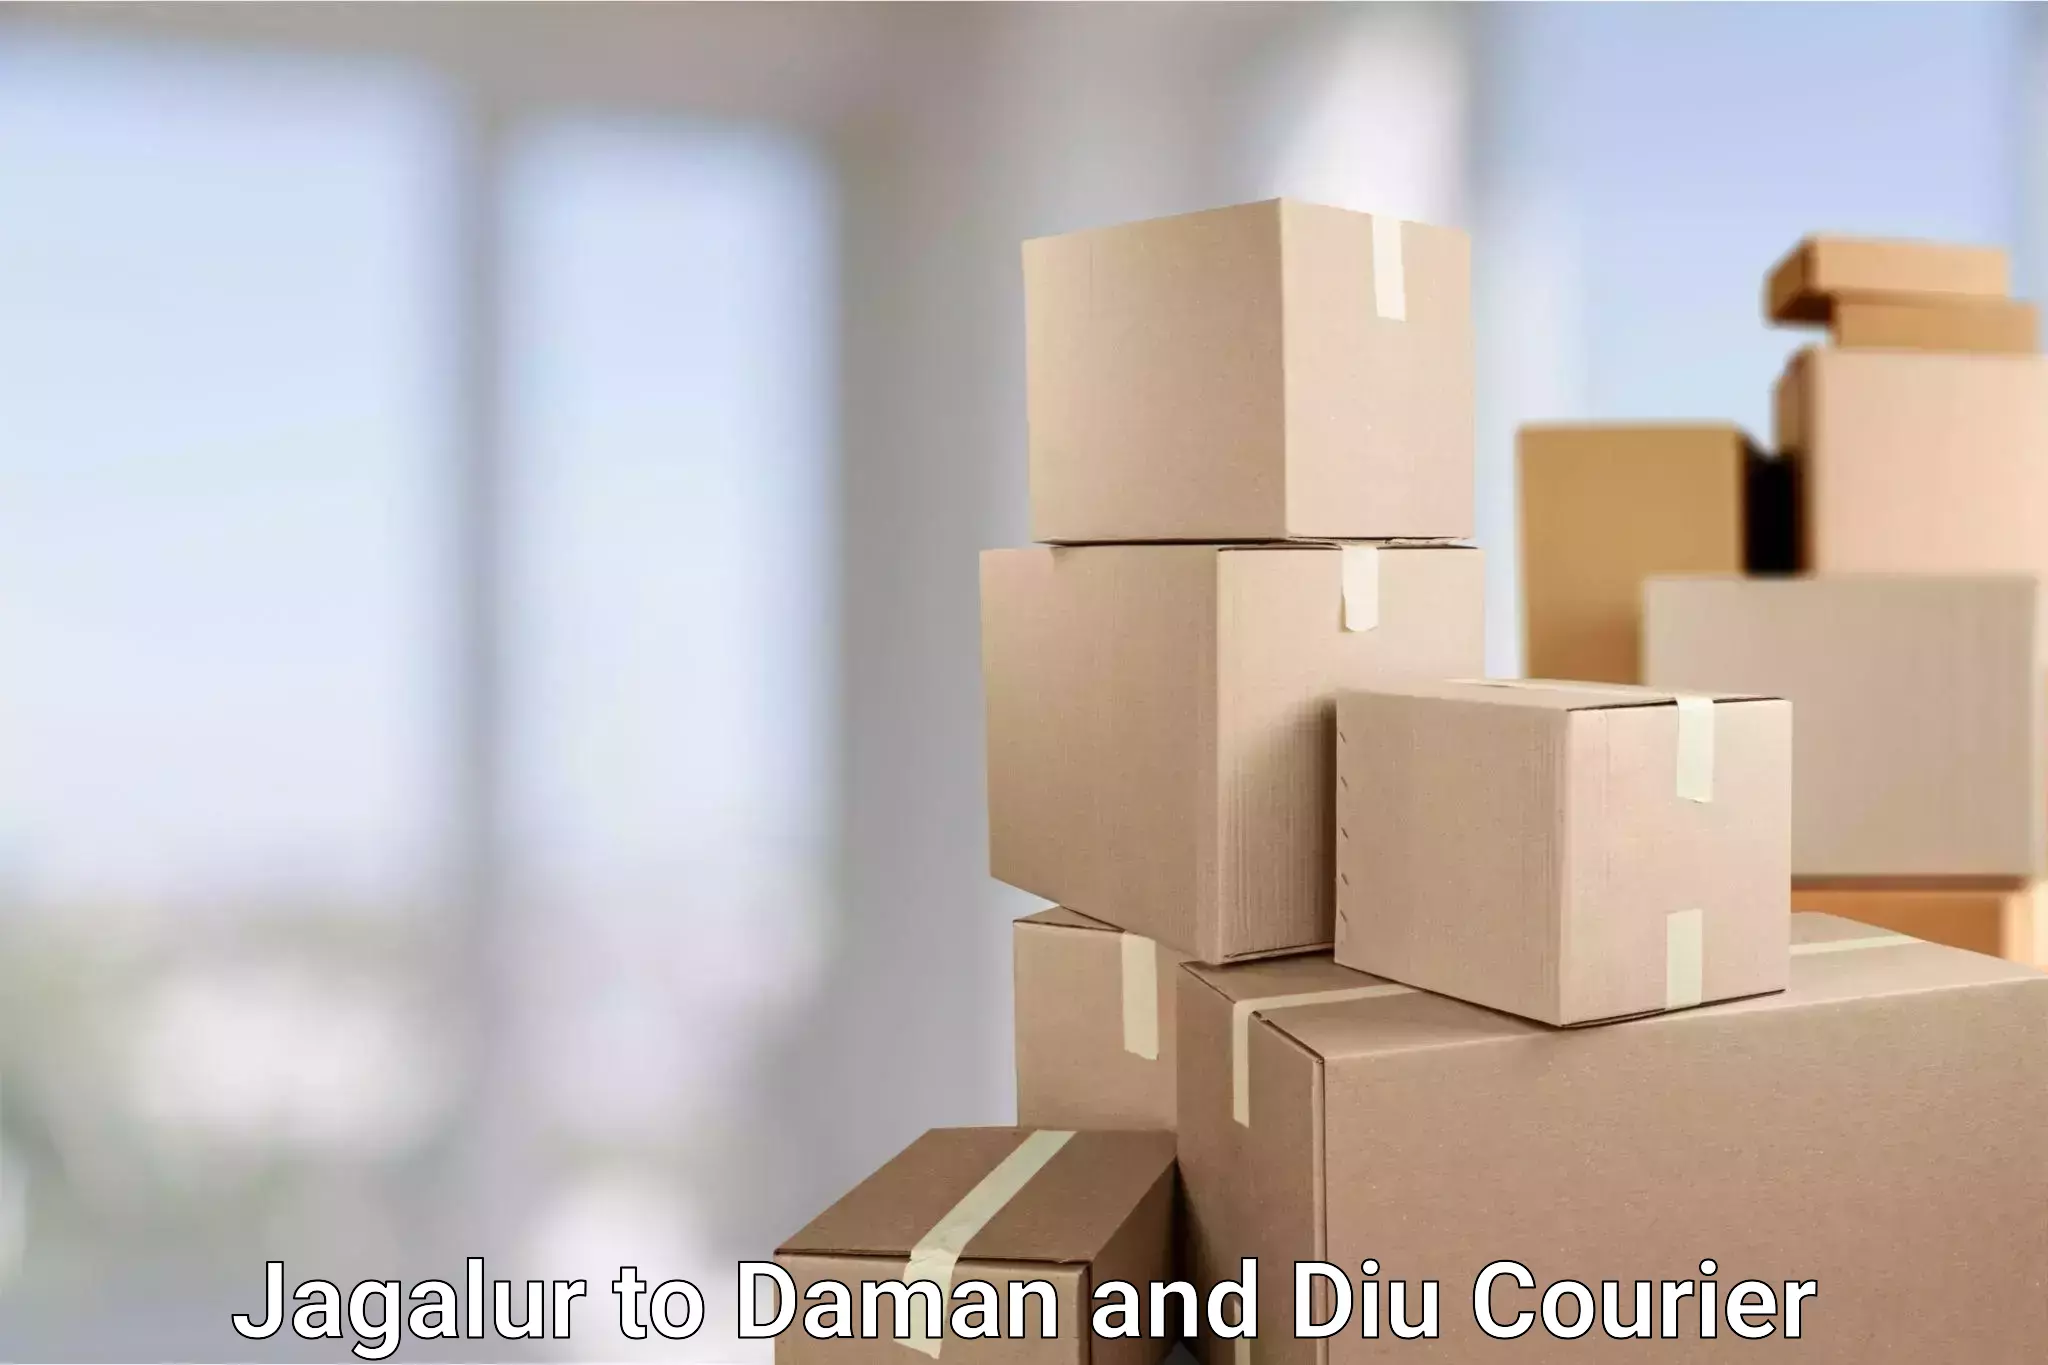 Efficient package consolidation Jagalur to Daman and Diu